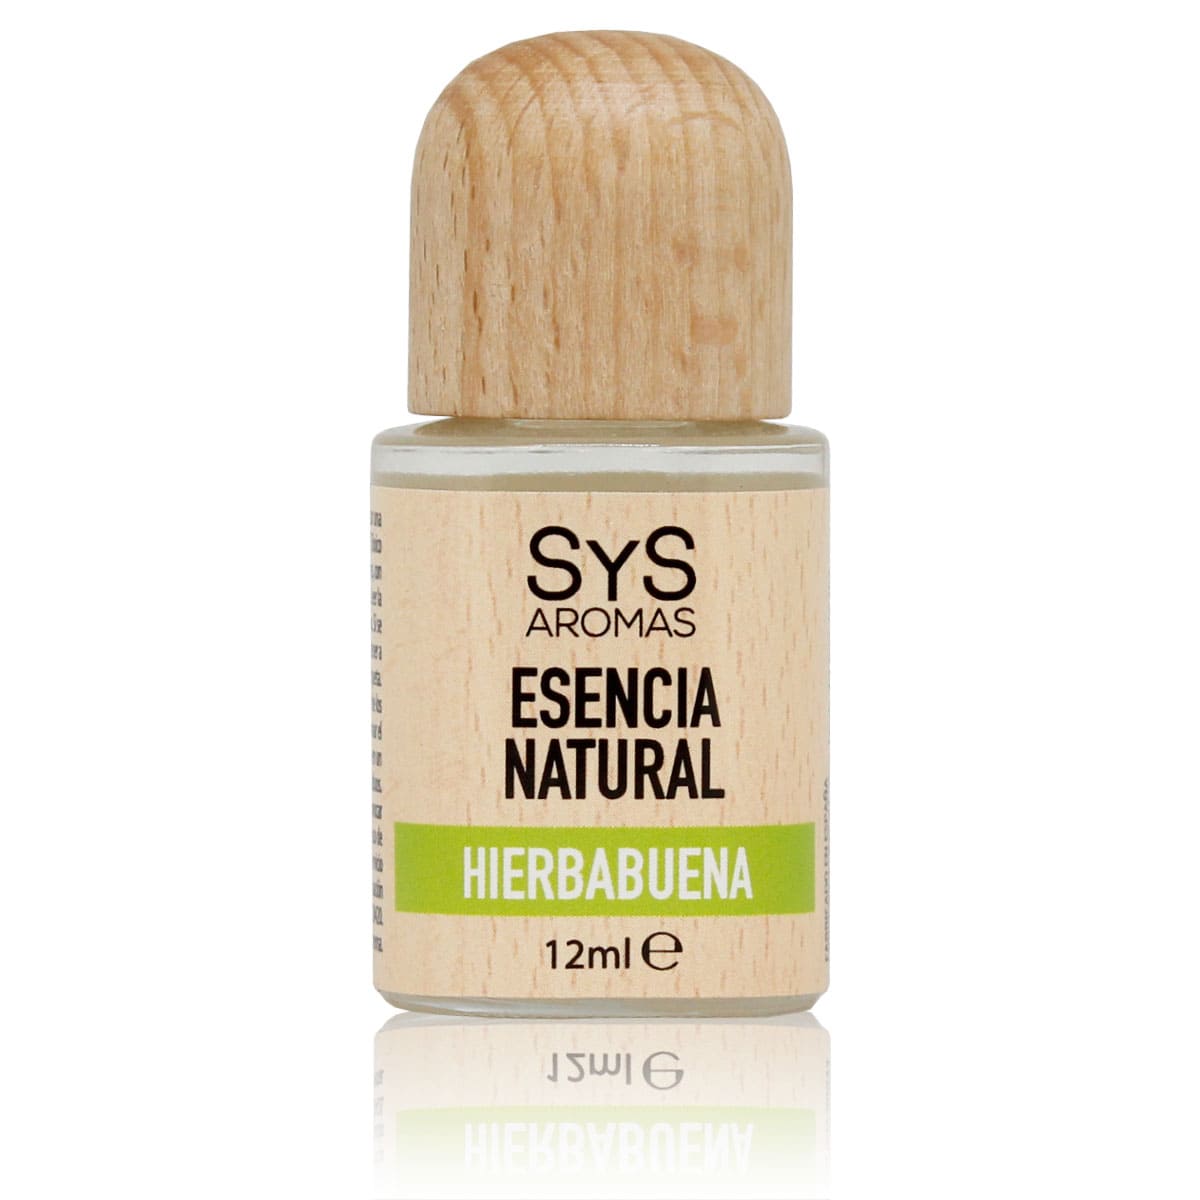 Buy Peppermint Essence 12ml SYS Aromas